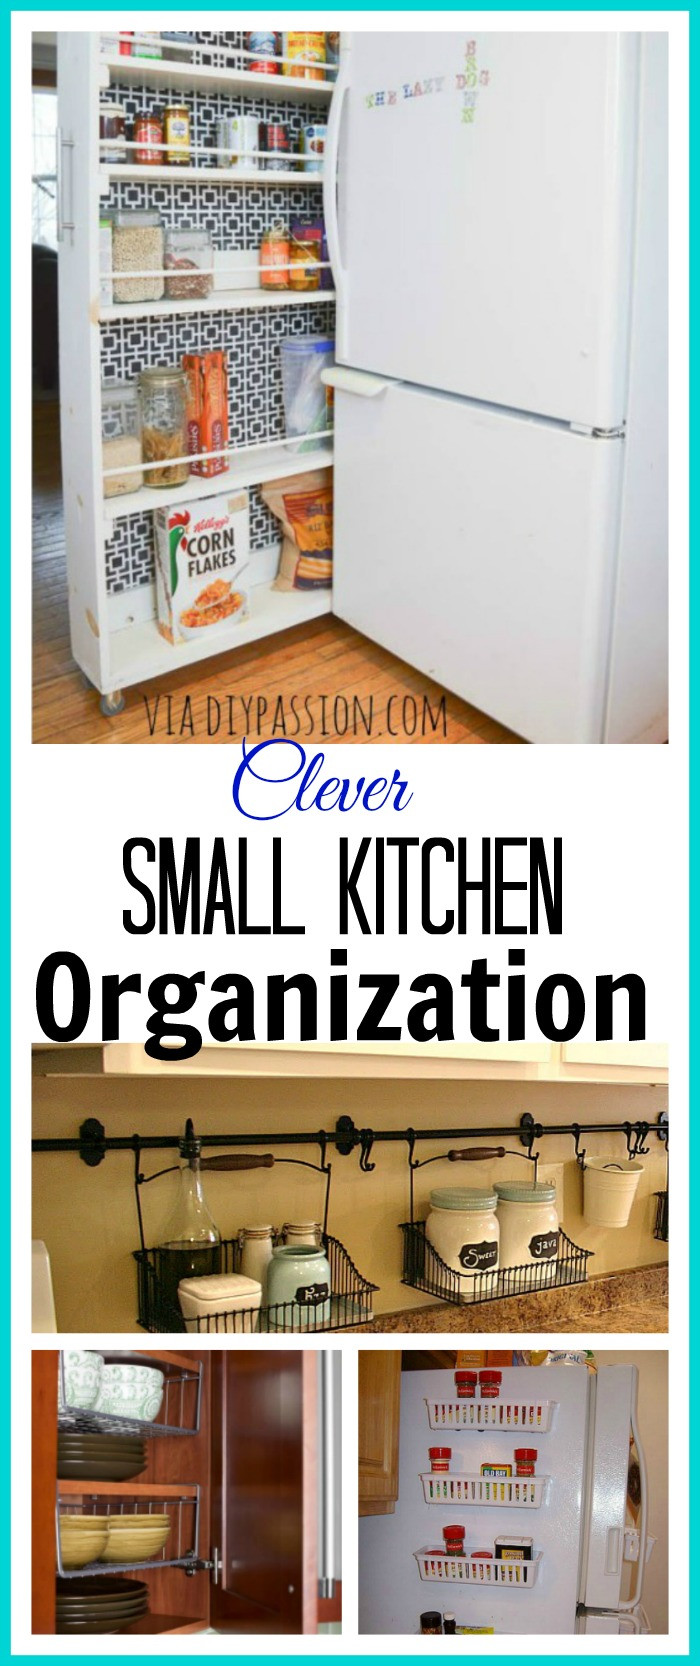 Kitchen Organization Ideas Small Spaces
 10 Ideas For Organizing a Small Kitchen A Cultivated Nest